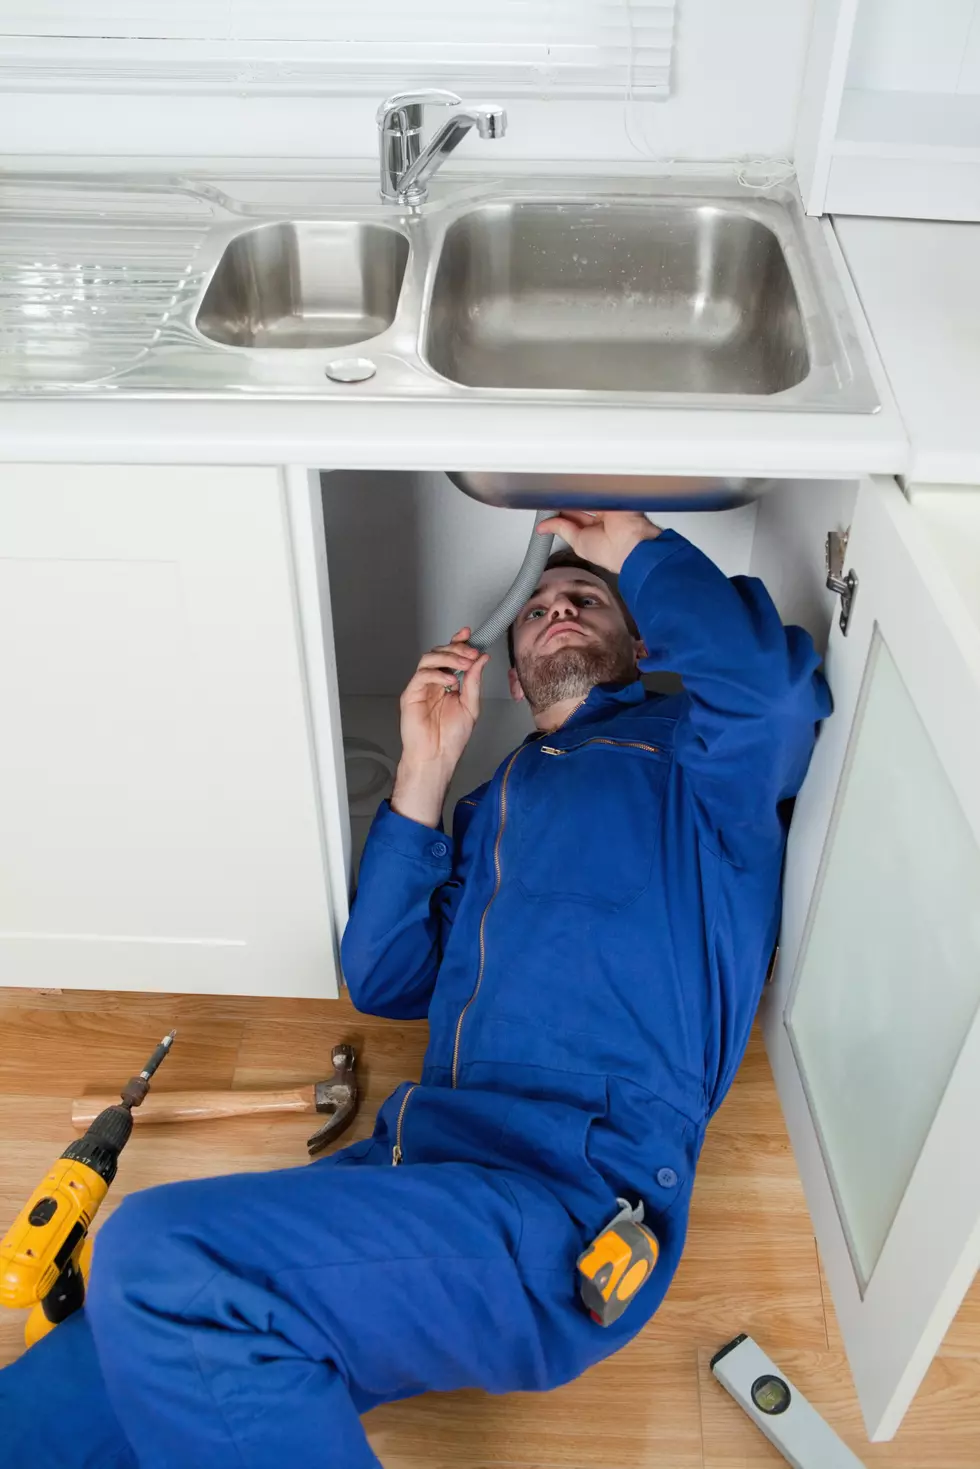 Plumbers Are People Too: An Ode To A Plumber [VIDEO]